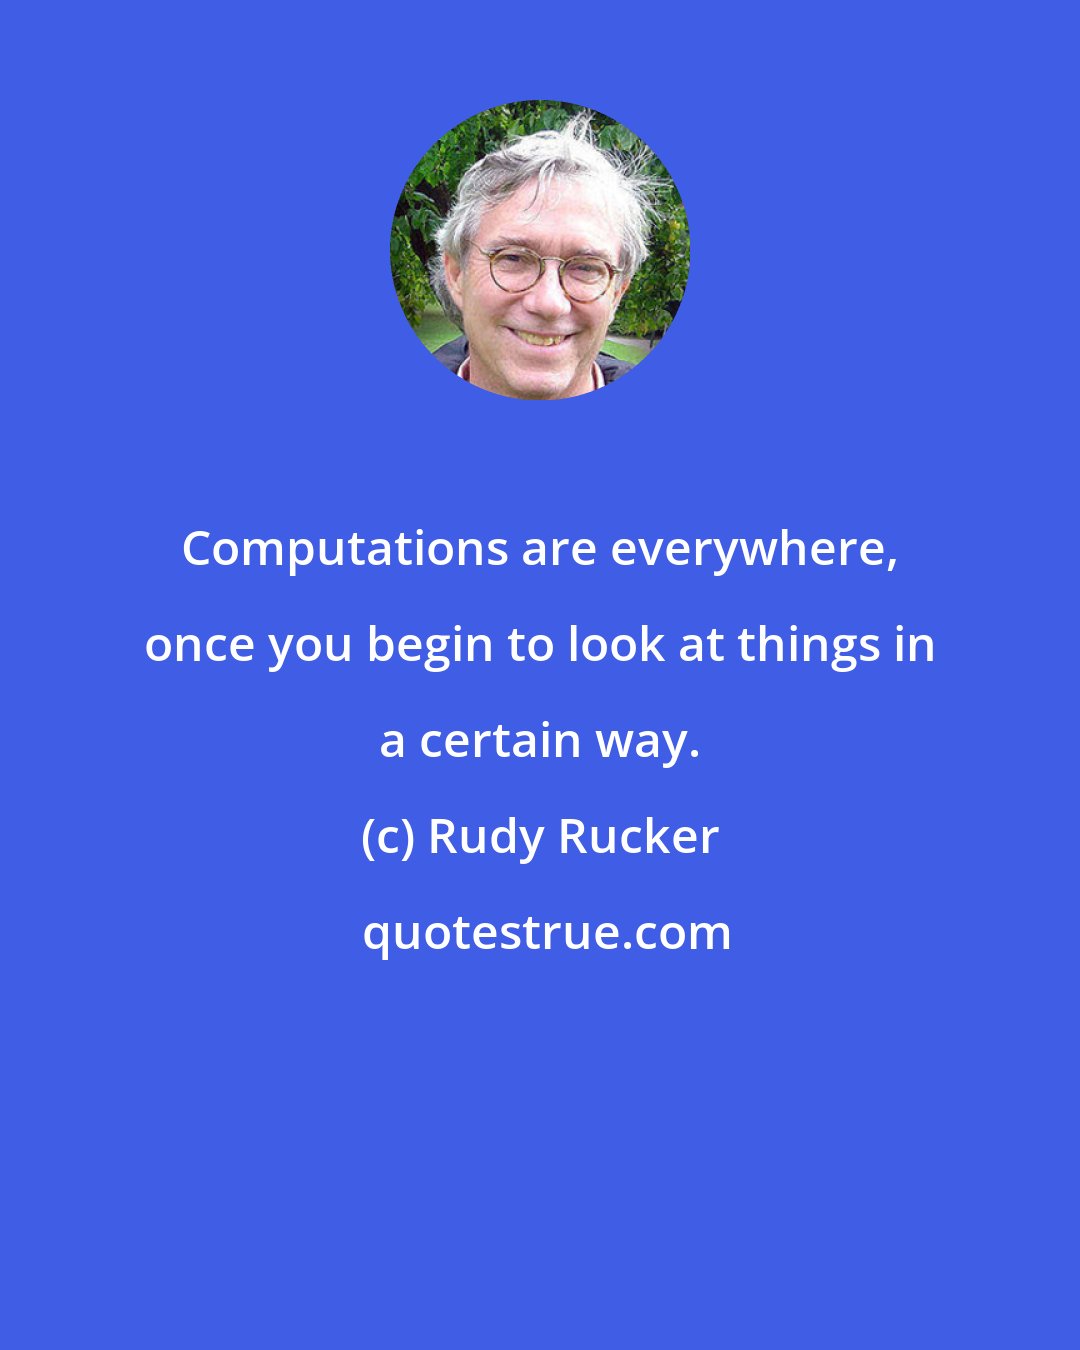 Rudy Rucker: Computations are everywhere, once you begin to look at things in a certain way.